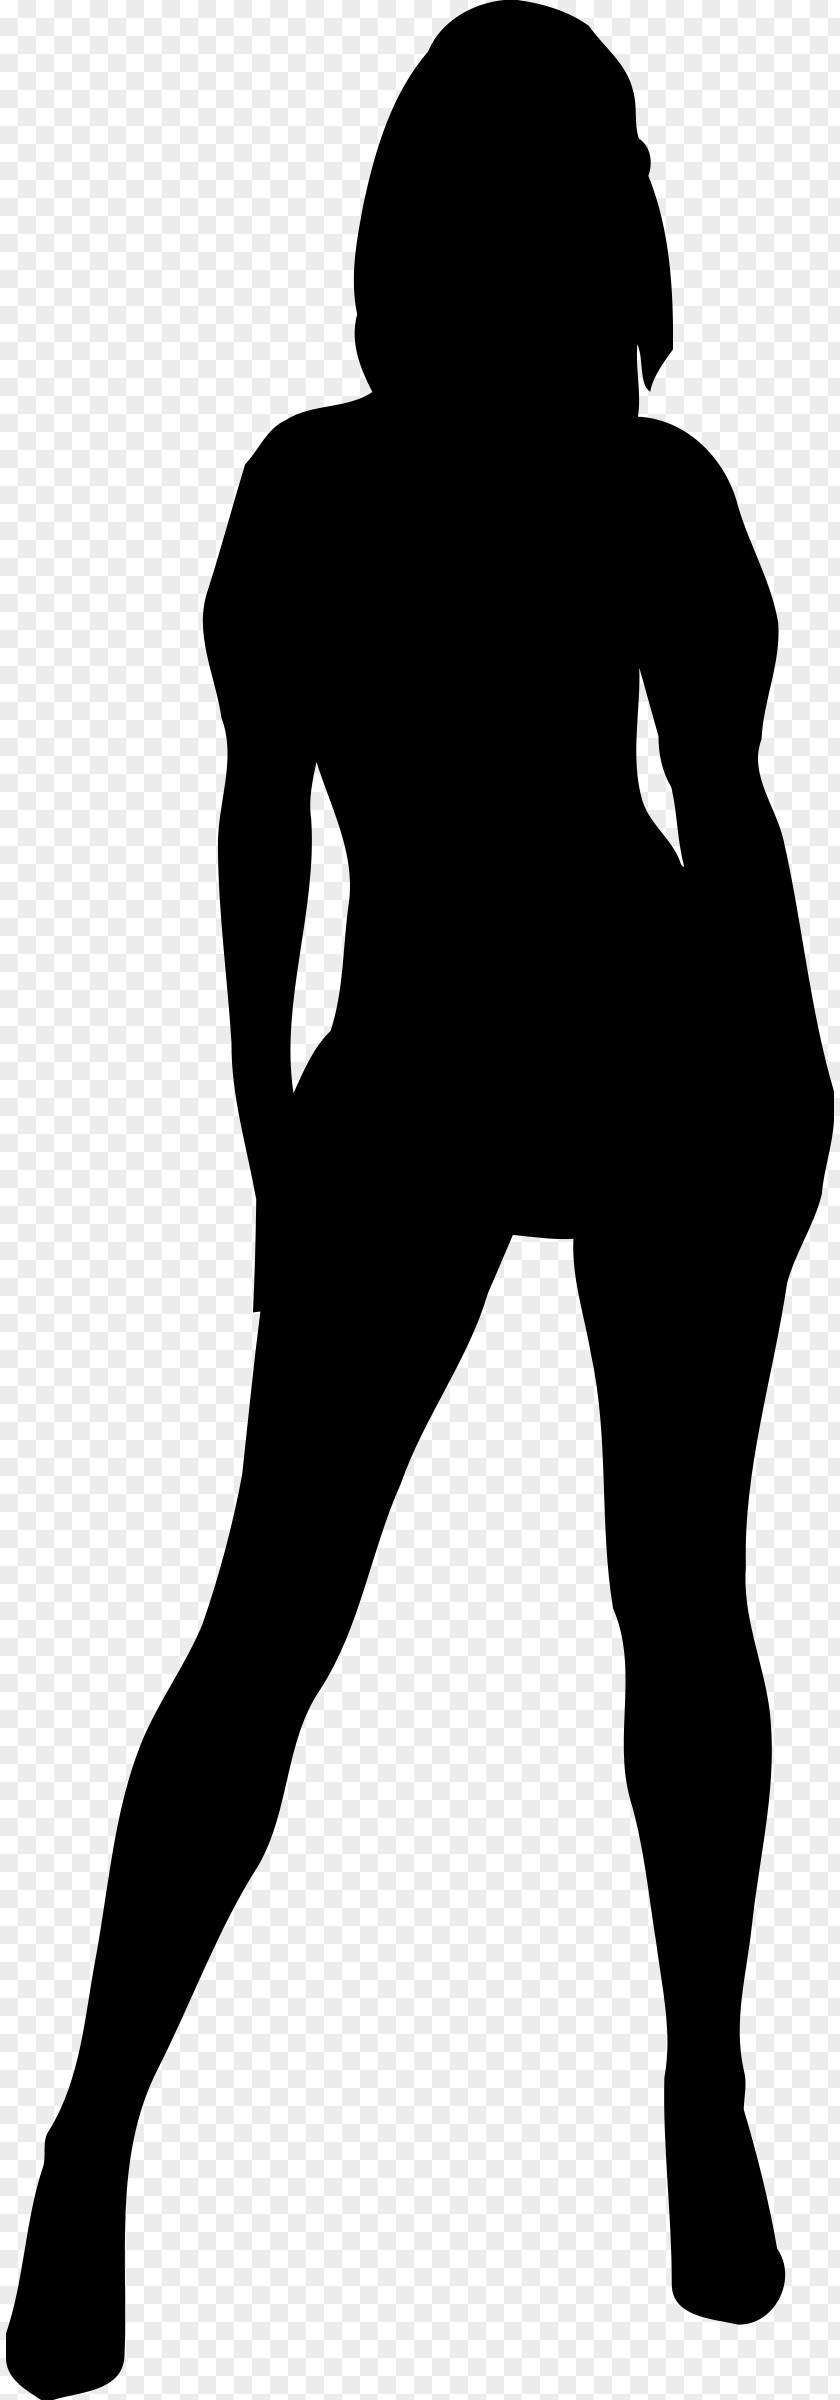 Woman Silhouette Catwoman Female Clip Art PNG